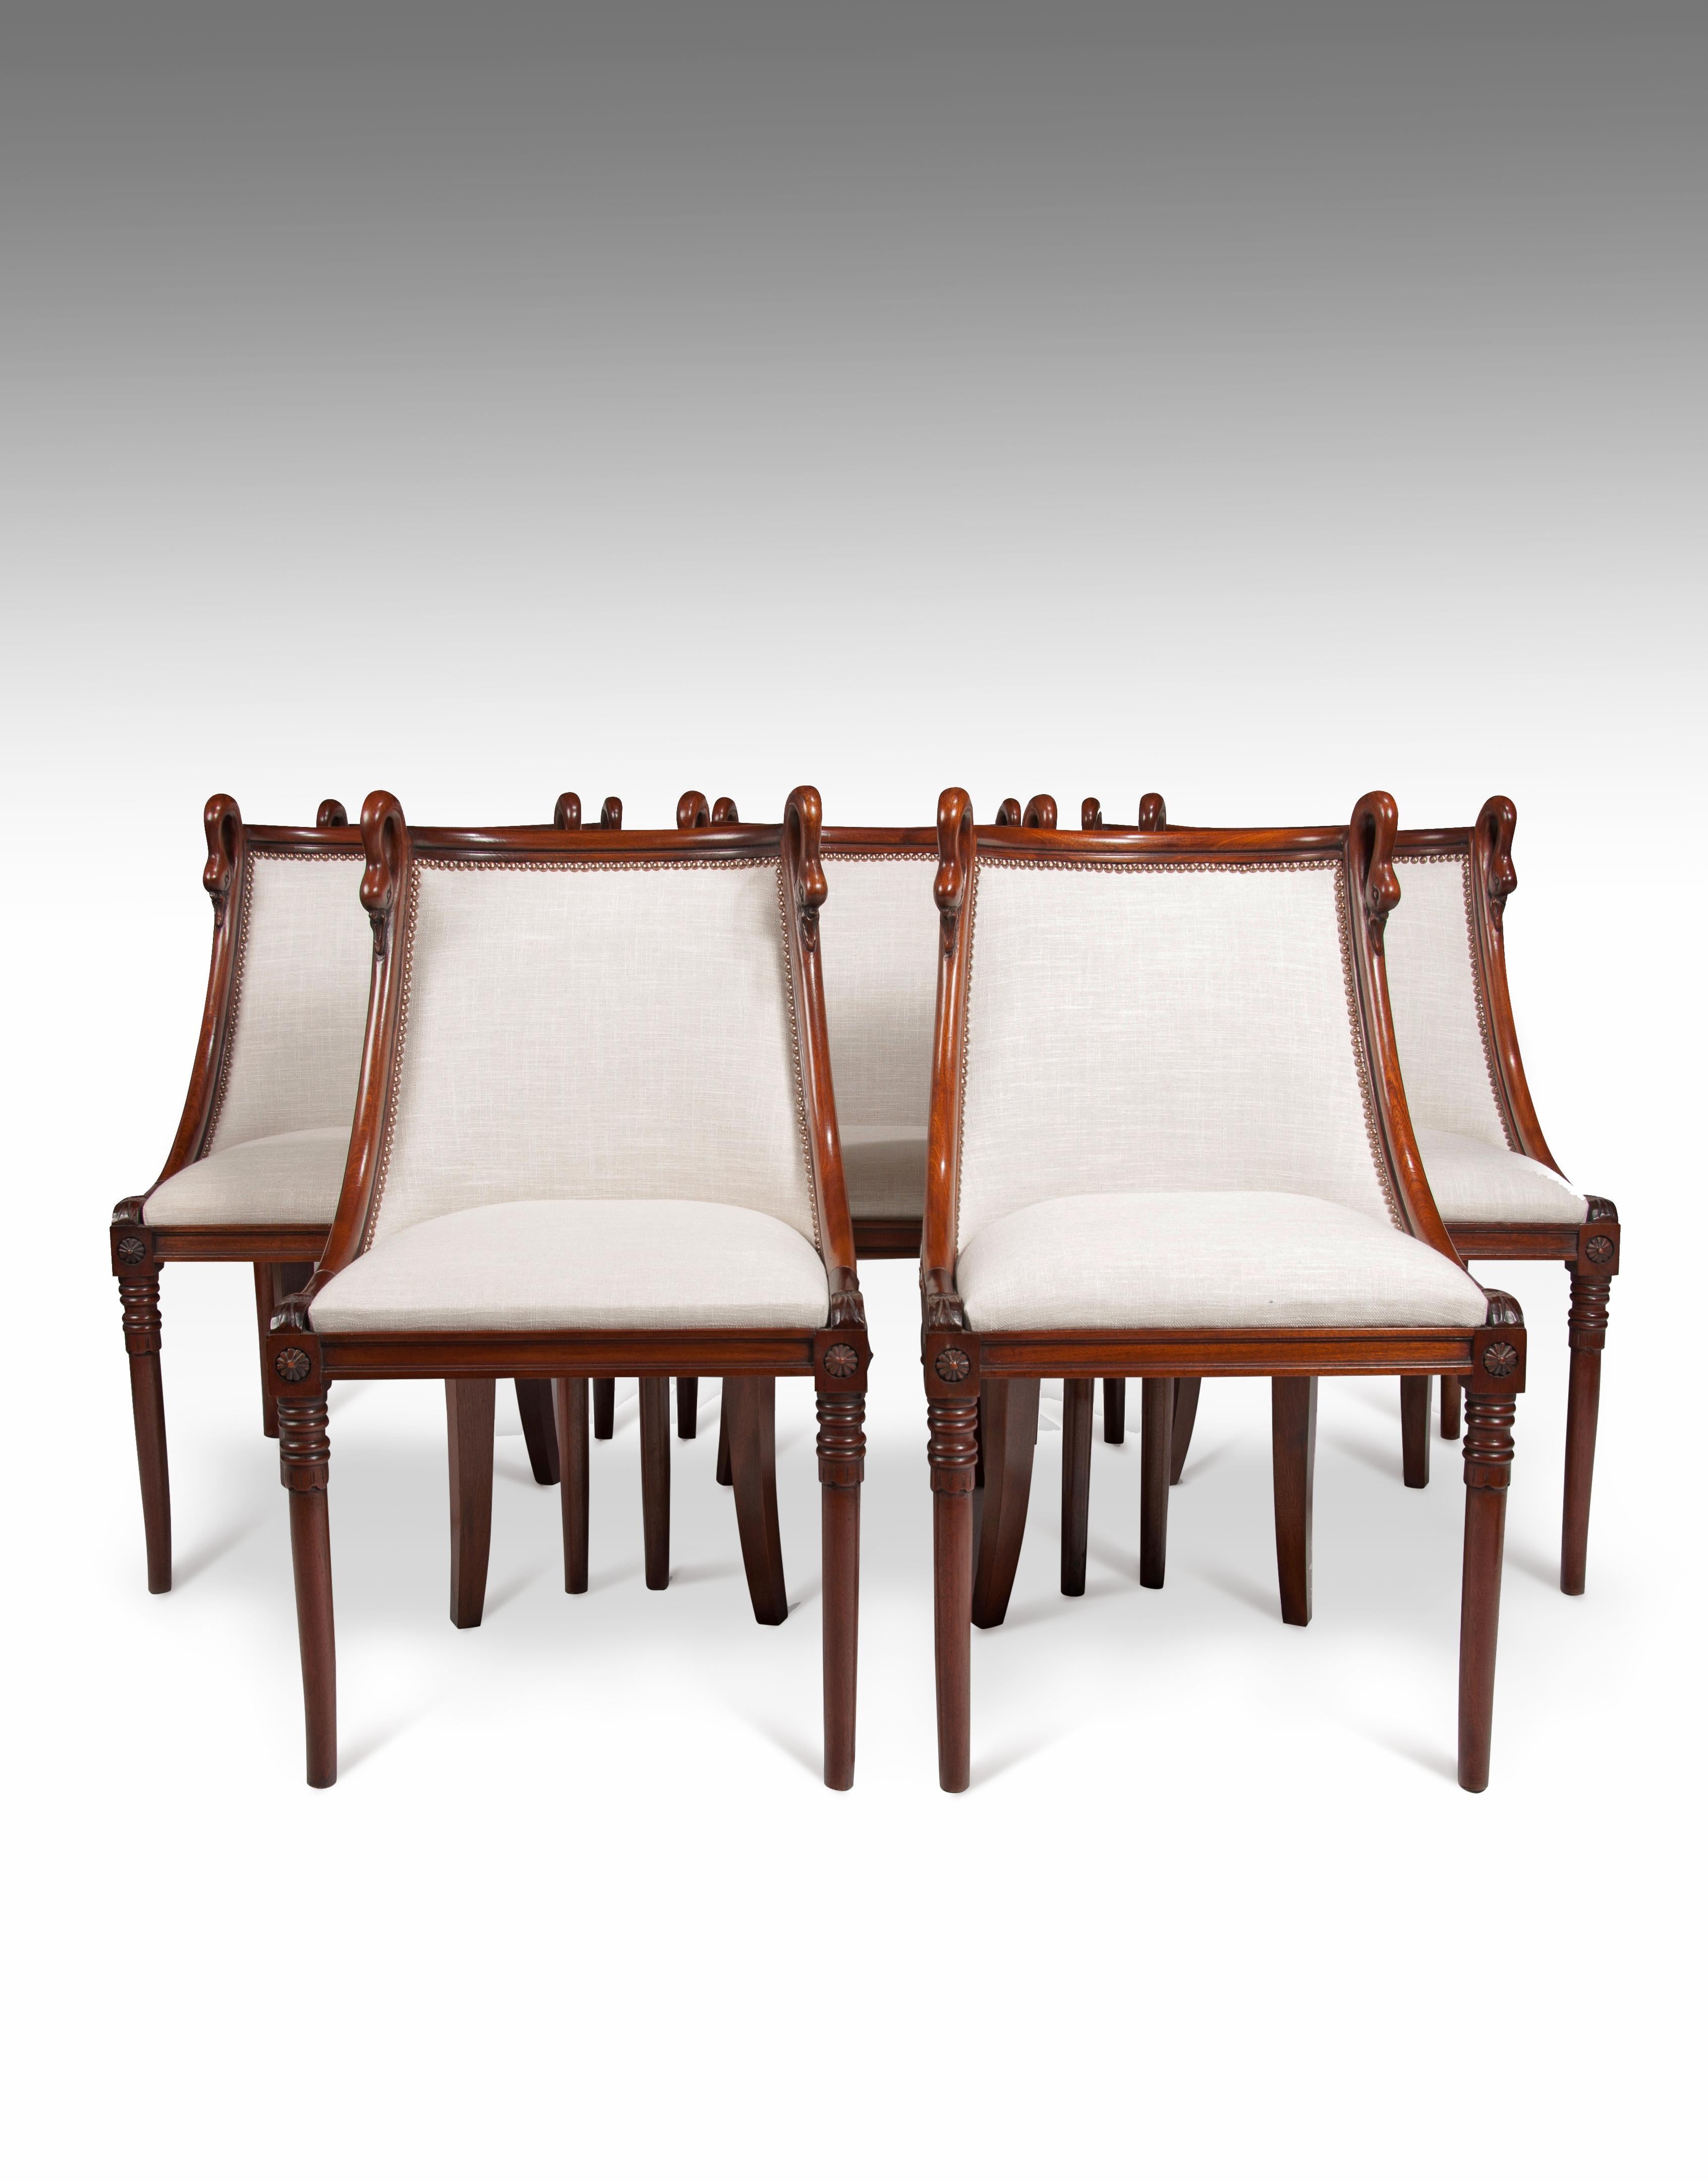 A charming set of 8 French 19th century Empire style barrel back mahogany dining chairs.

French, circa 1880.

Constructed of solid mahogany with a French Empire influence, the sweeping curved barrel backs being flanked by carved swan